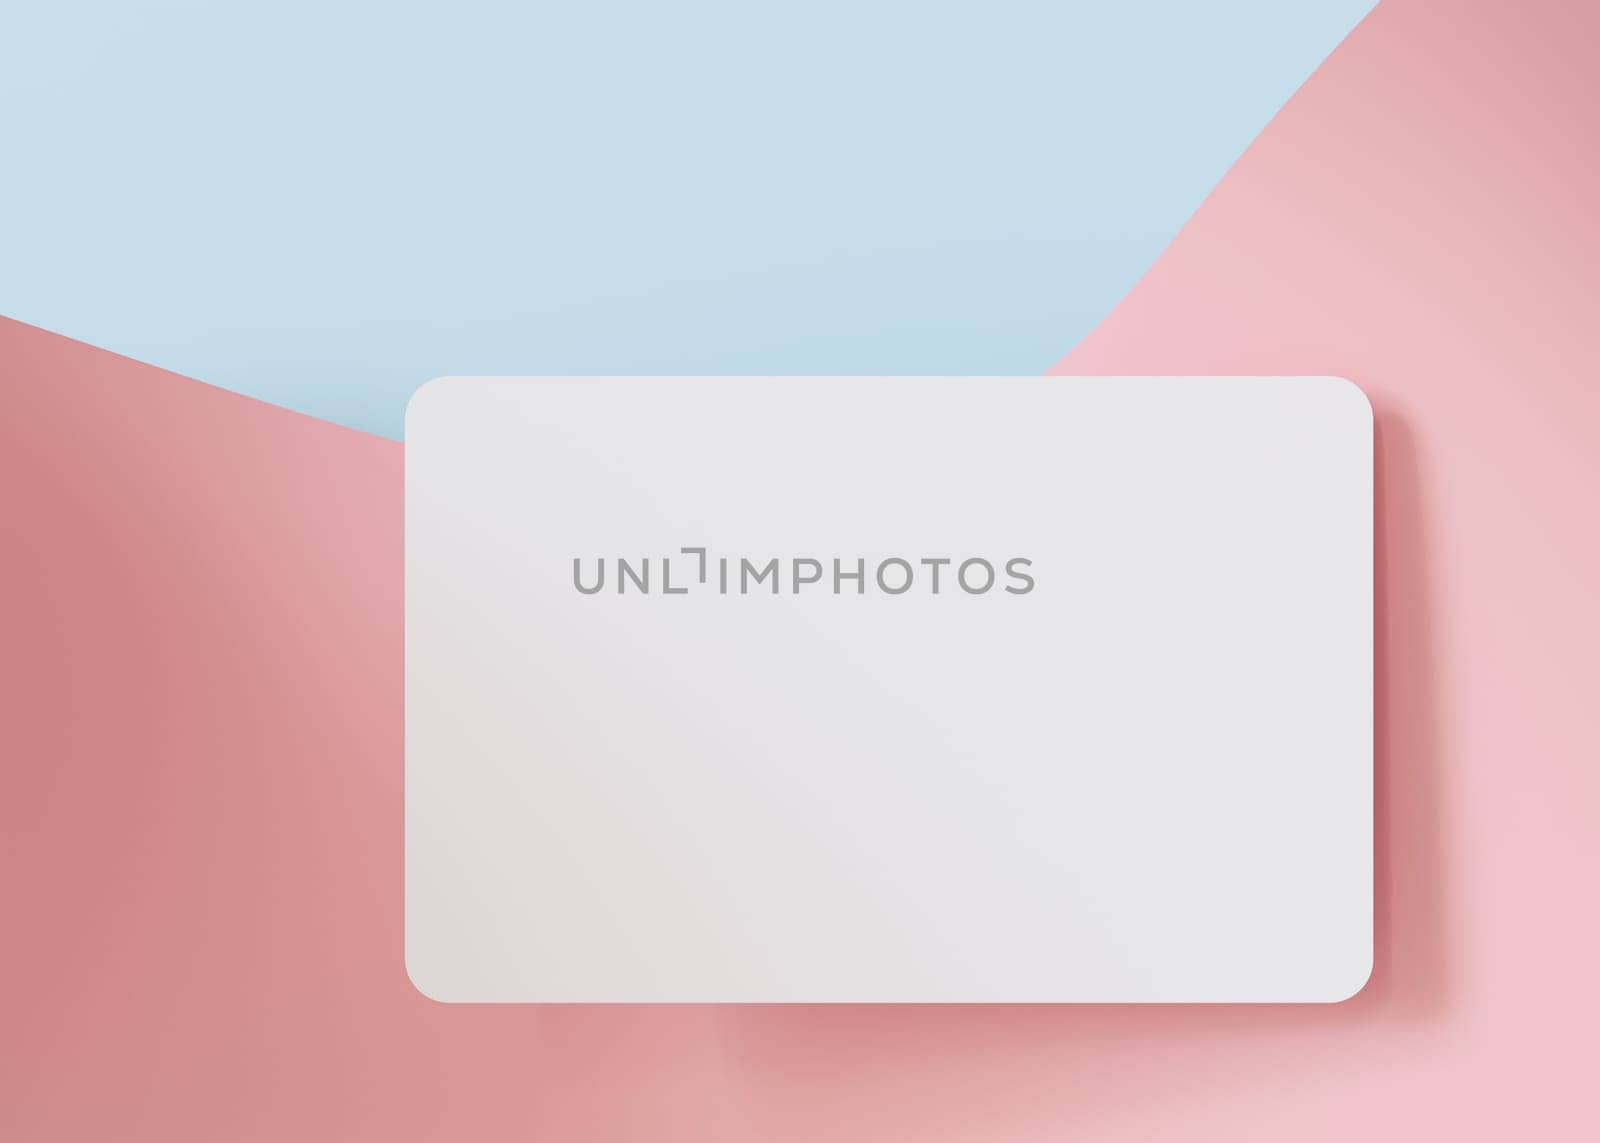 Clean white business card mockup on pastel pink and blue background, perfect for a fresh and modern brand representation. European size, 3,25 x 2,17 inch. Visiting, name card. Rounded corners. 3D